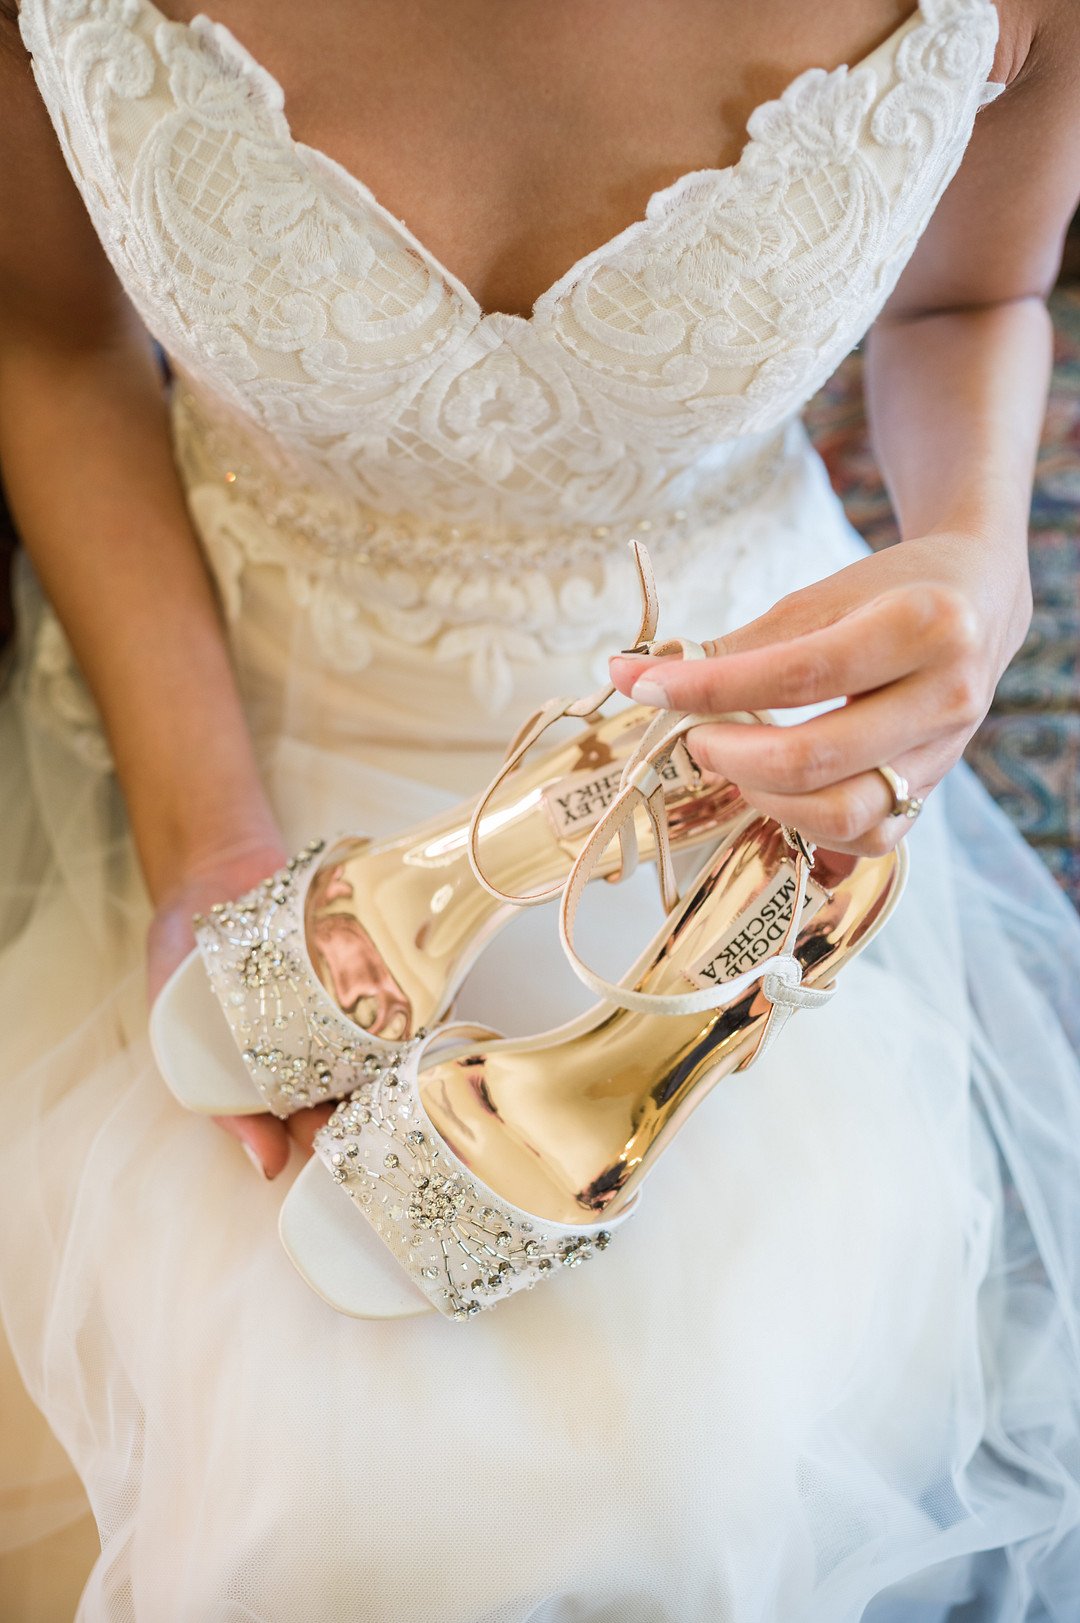 Chan_Chan_Winterlyn Photography_GLESSNER HOUSE CHICAGO WEDDING-20_low.jpg